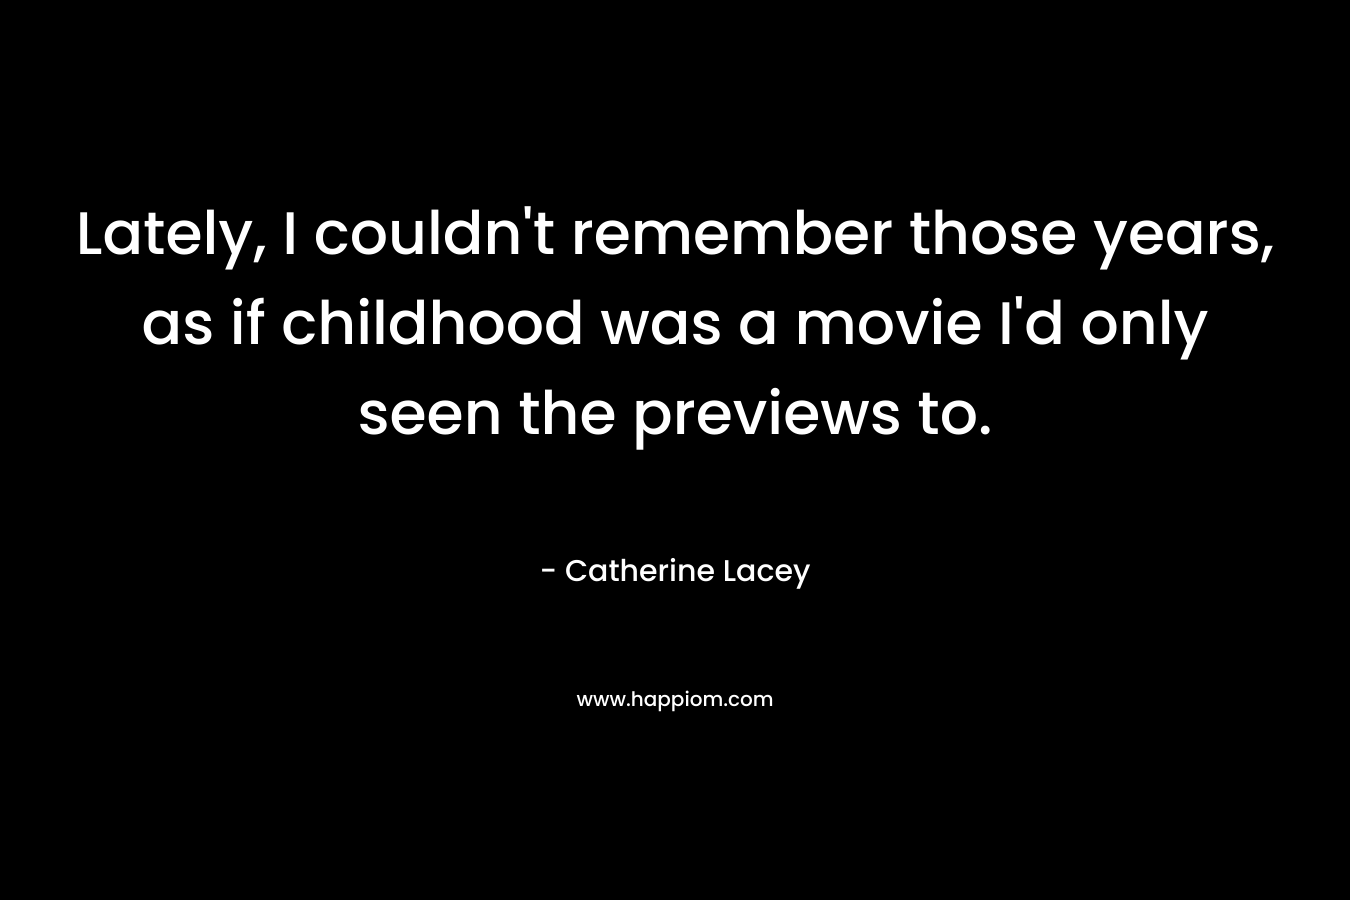 Lately, I couldn’t remember those years, as if childhood was a movie I’d only seen the previews to. – Catherine Lacey